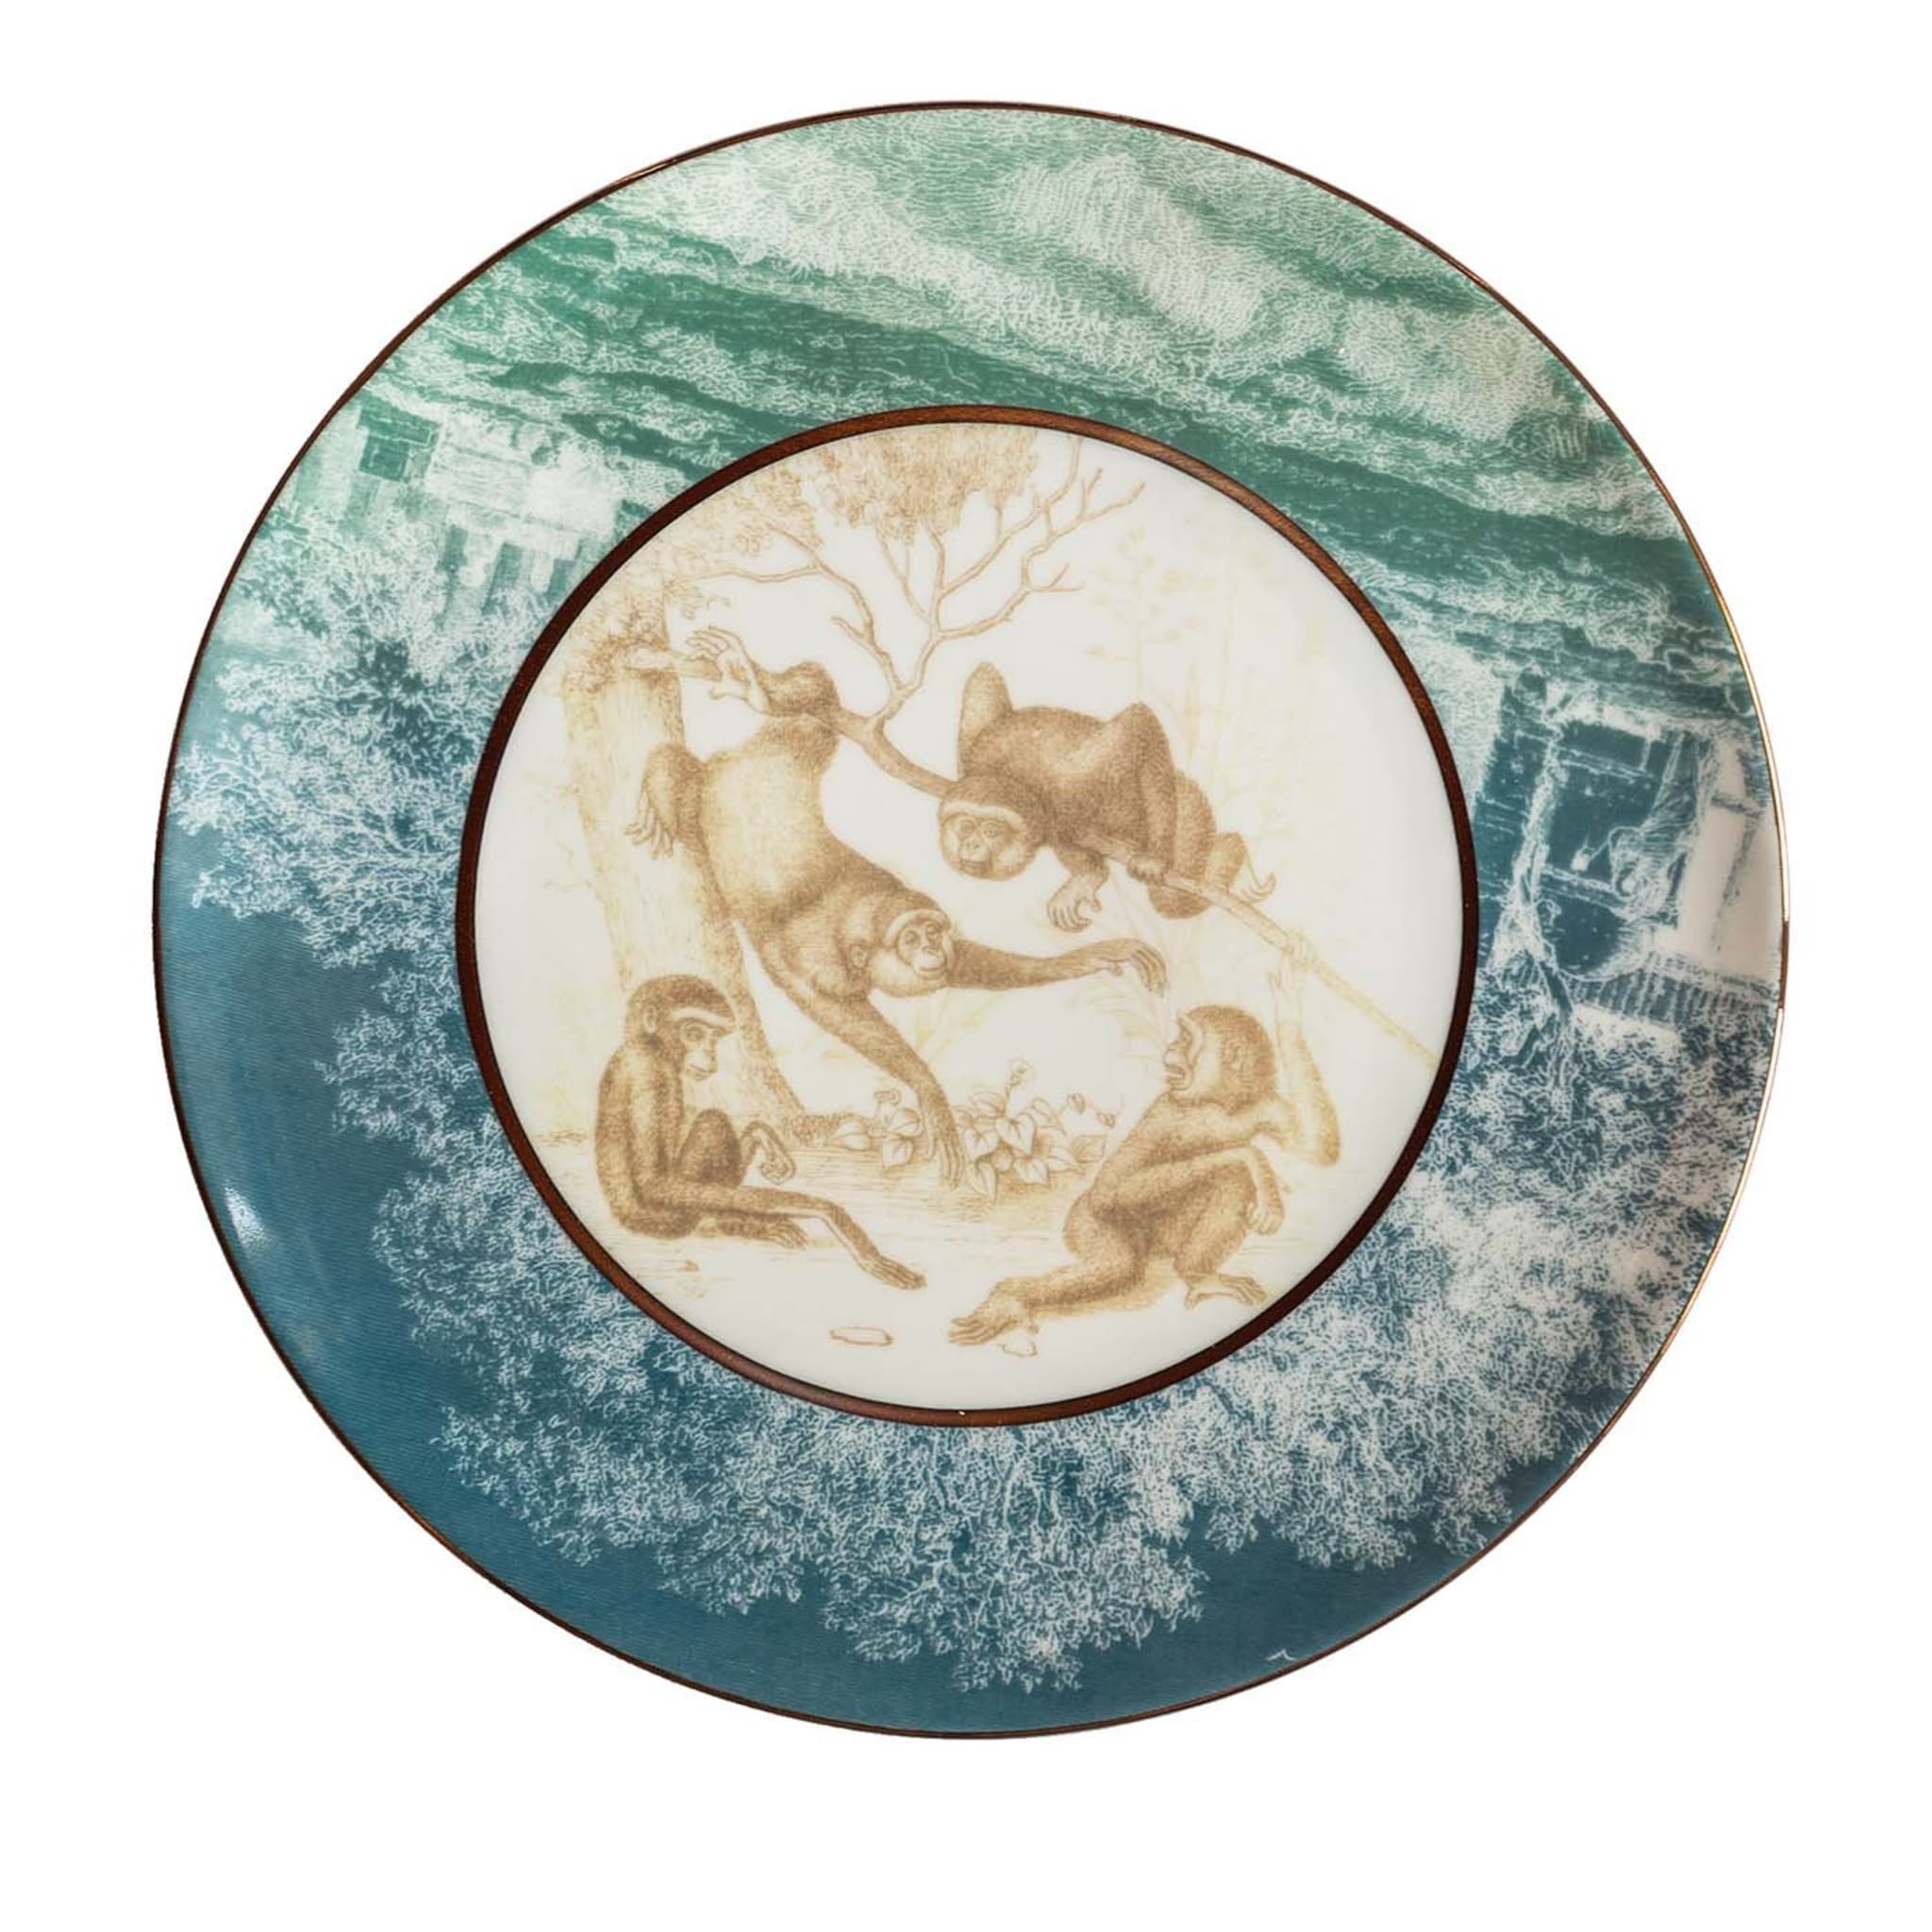 Galtaji Porcelain Dinner Plate With Landscape And Monkeys #1 - Main view